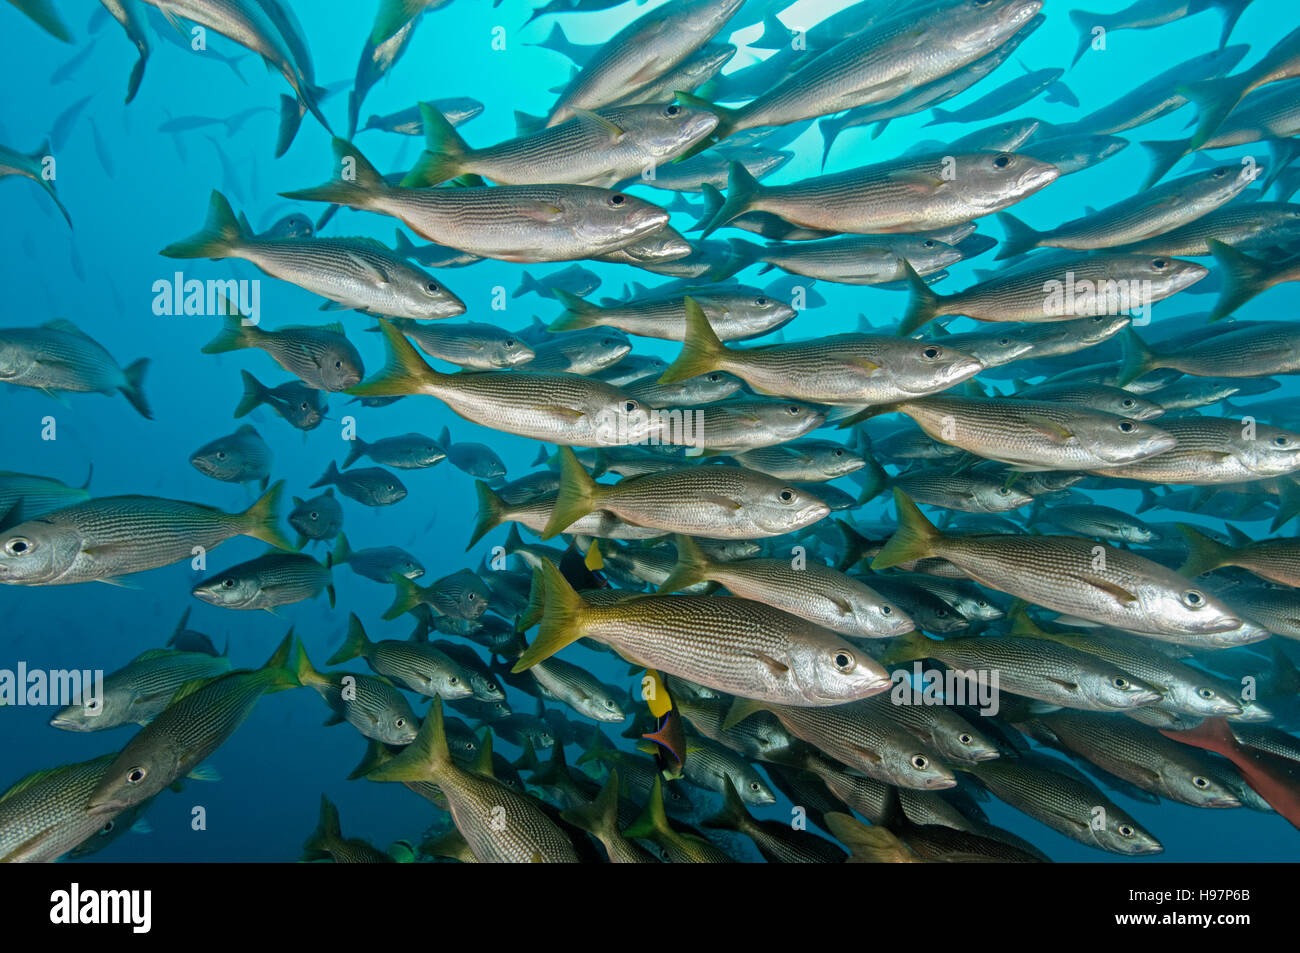 school of Golden Snappers, Malpelo Island, Colombia, East Pacific Ocean Stock Photo